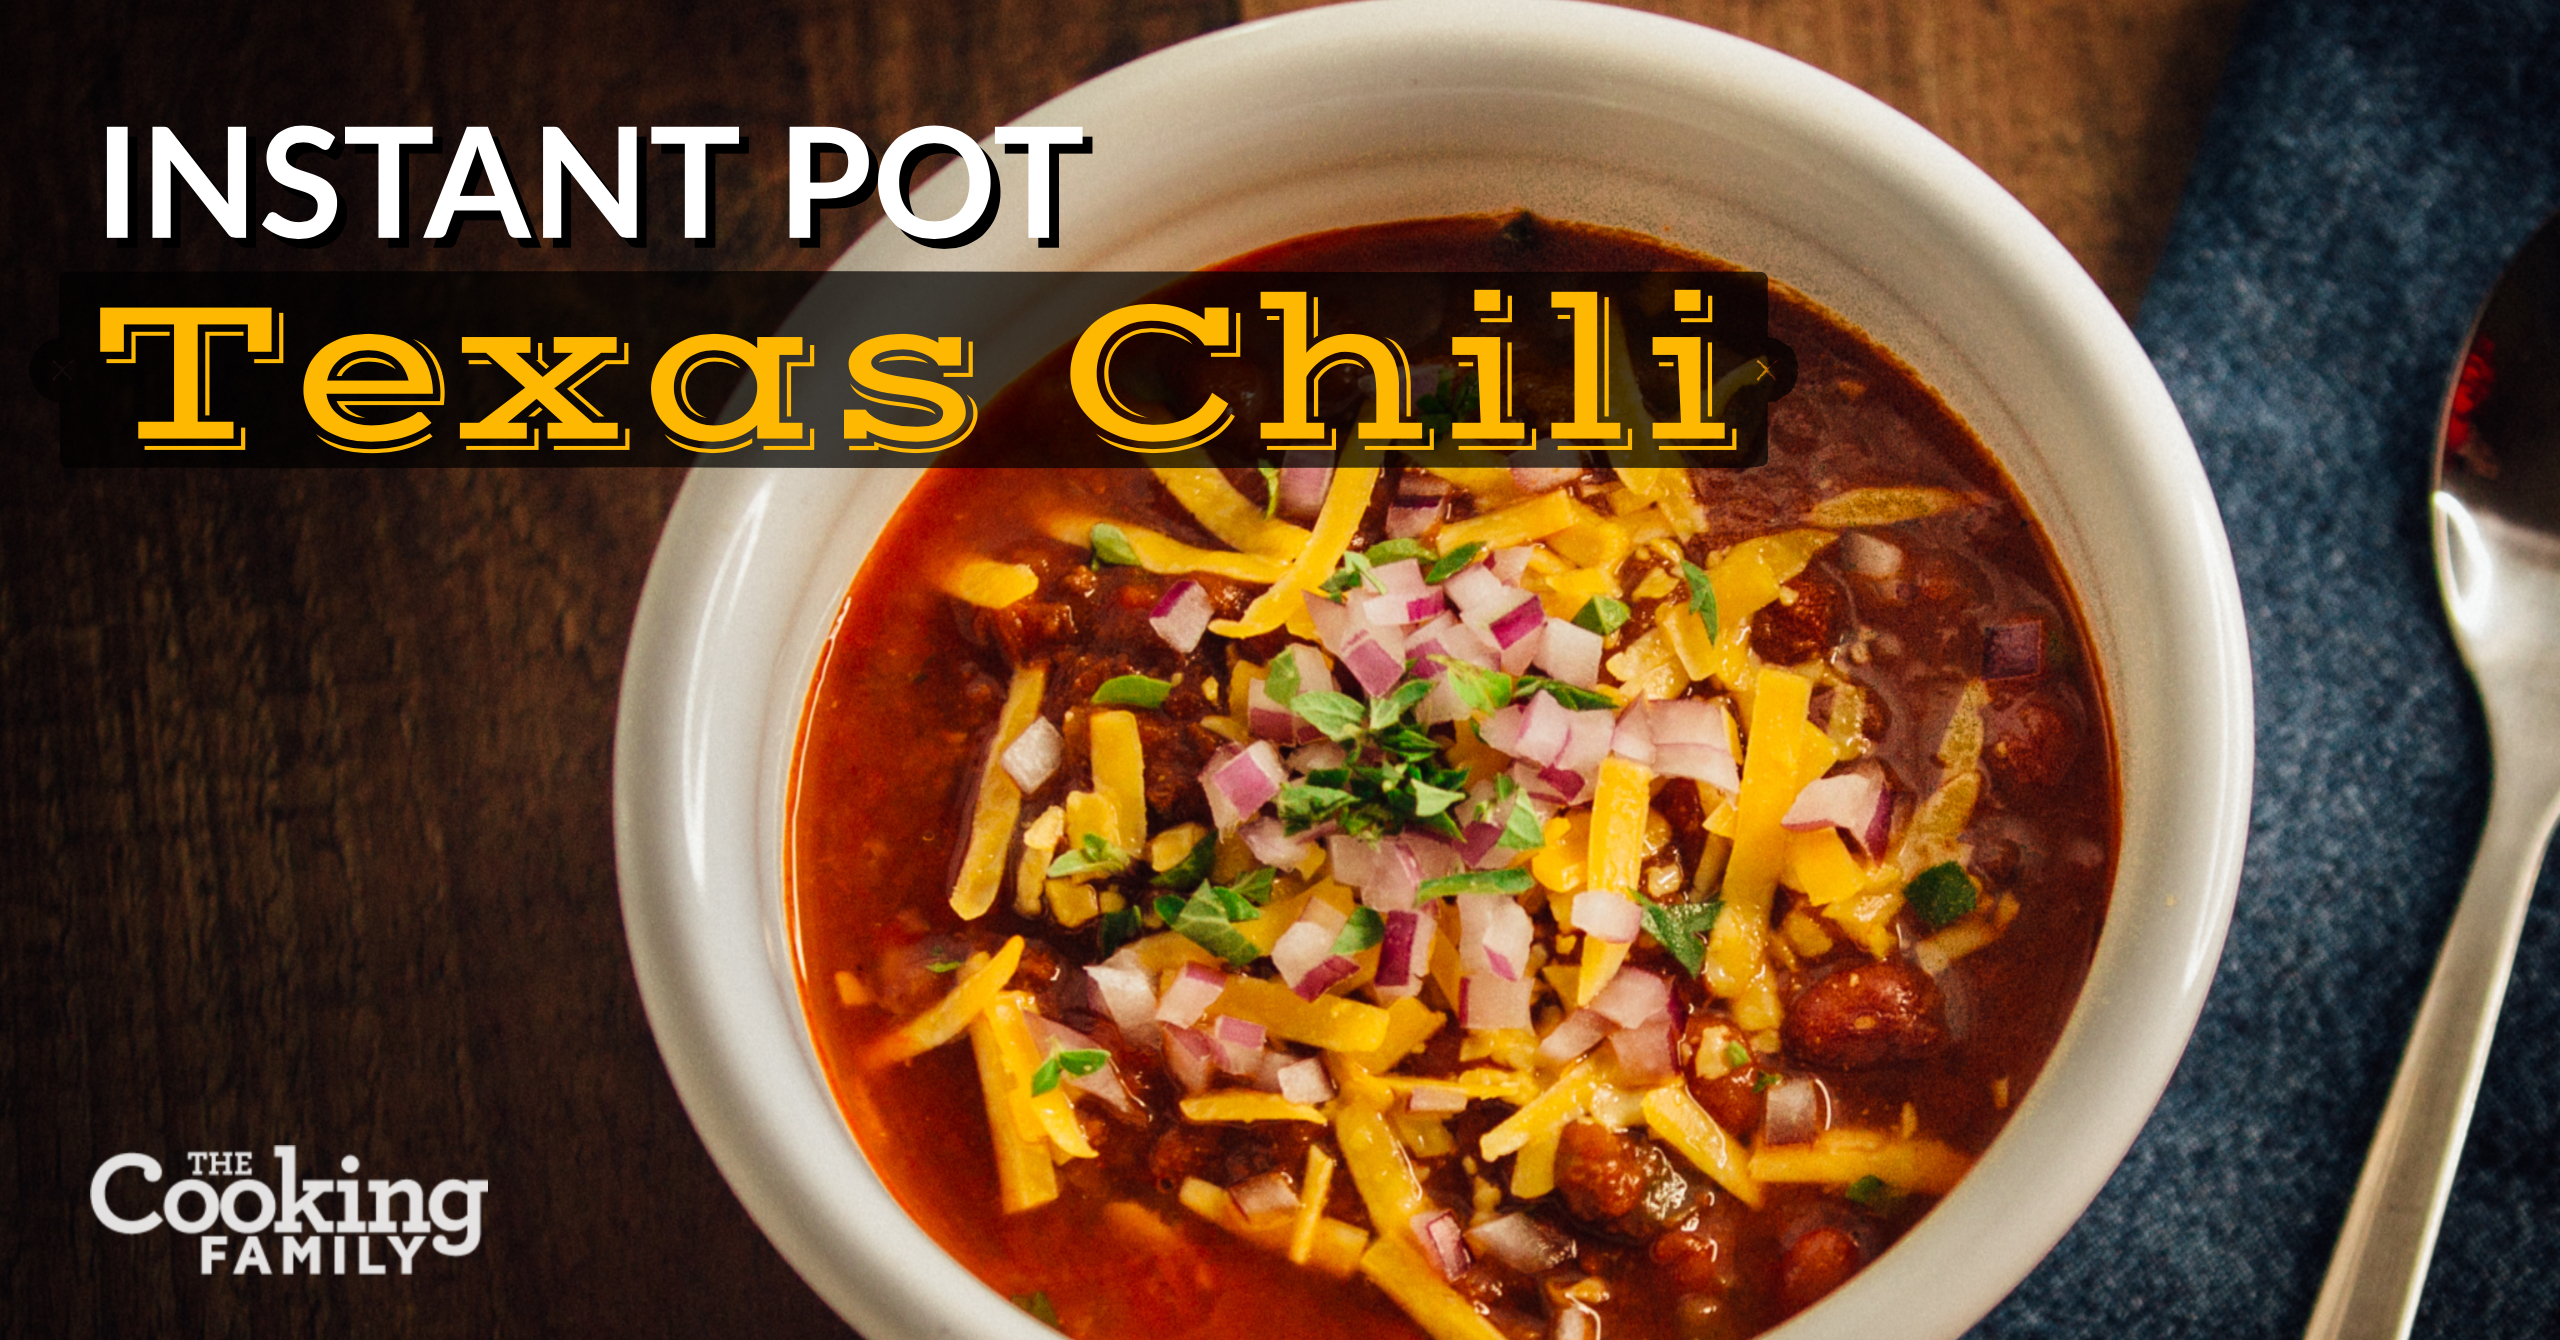 Instant Pot Texas Chili - The Cooking Family